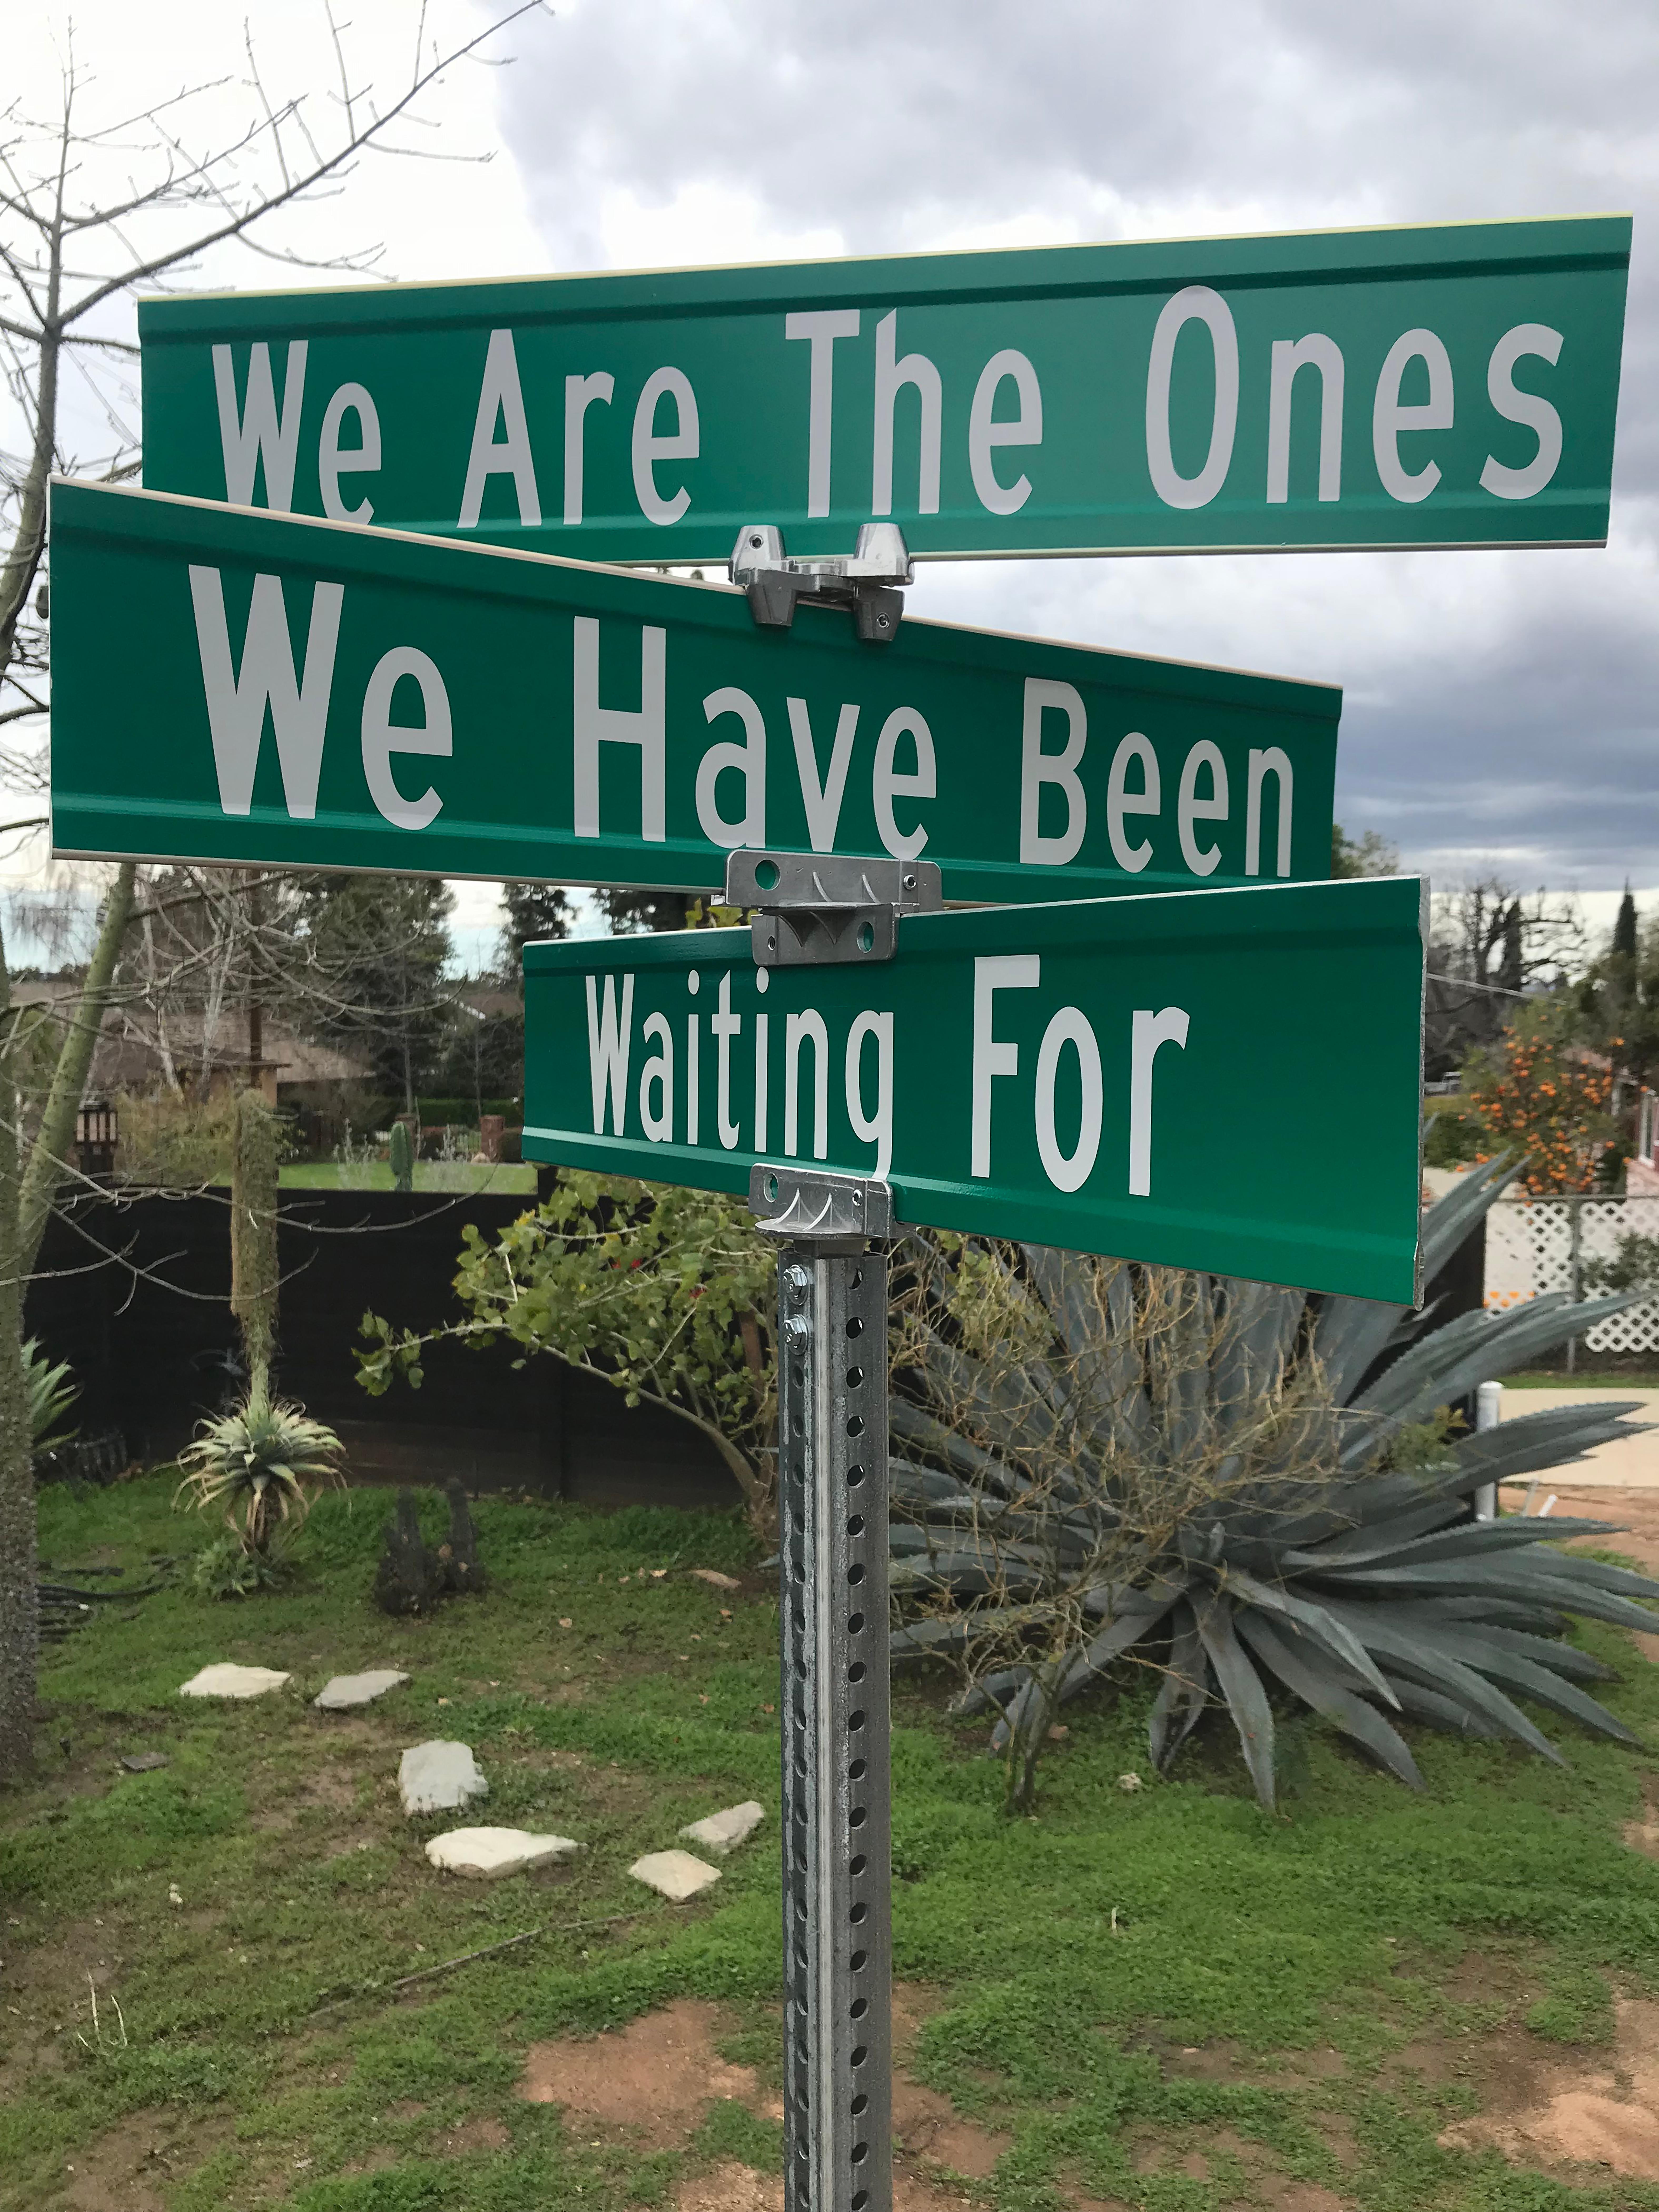 "We Are The Ones" - Contemporary Street Sign Sculpture